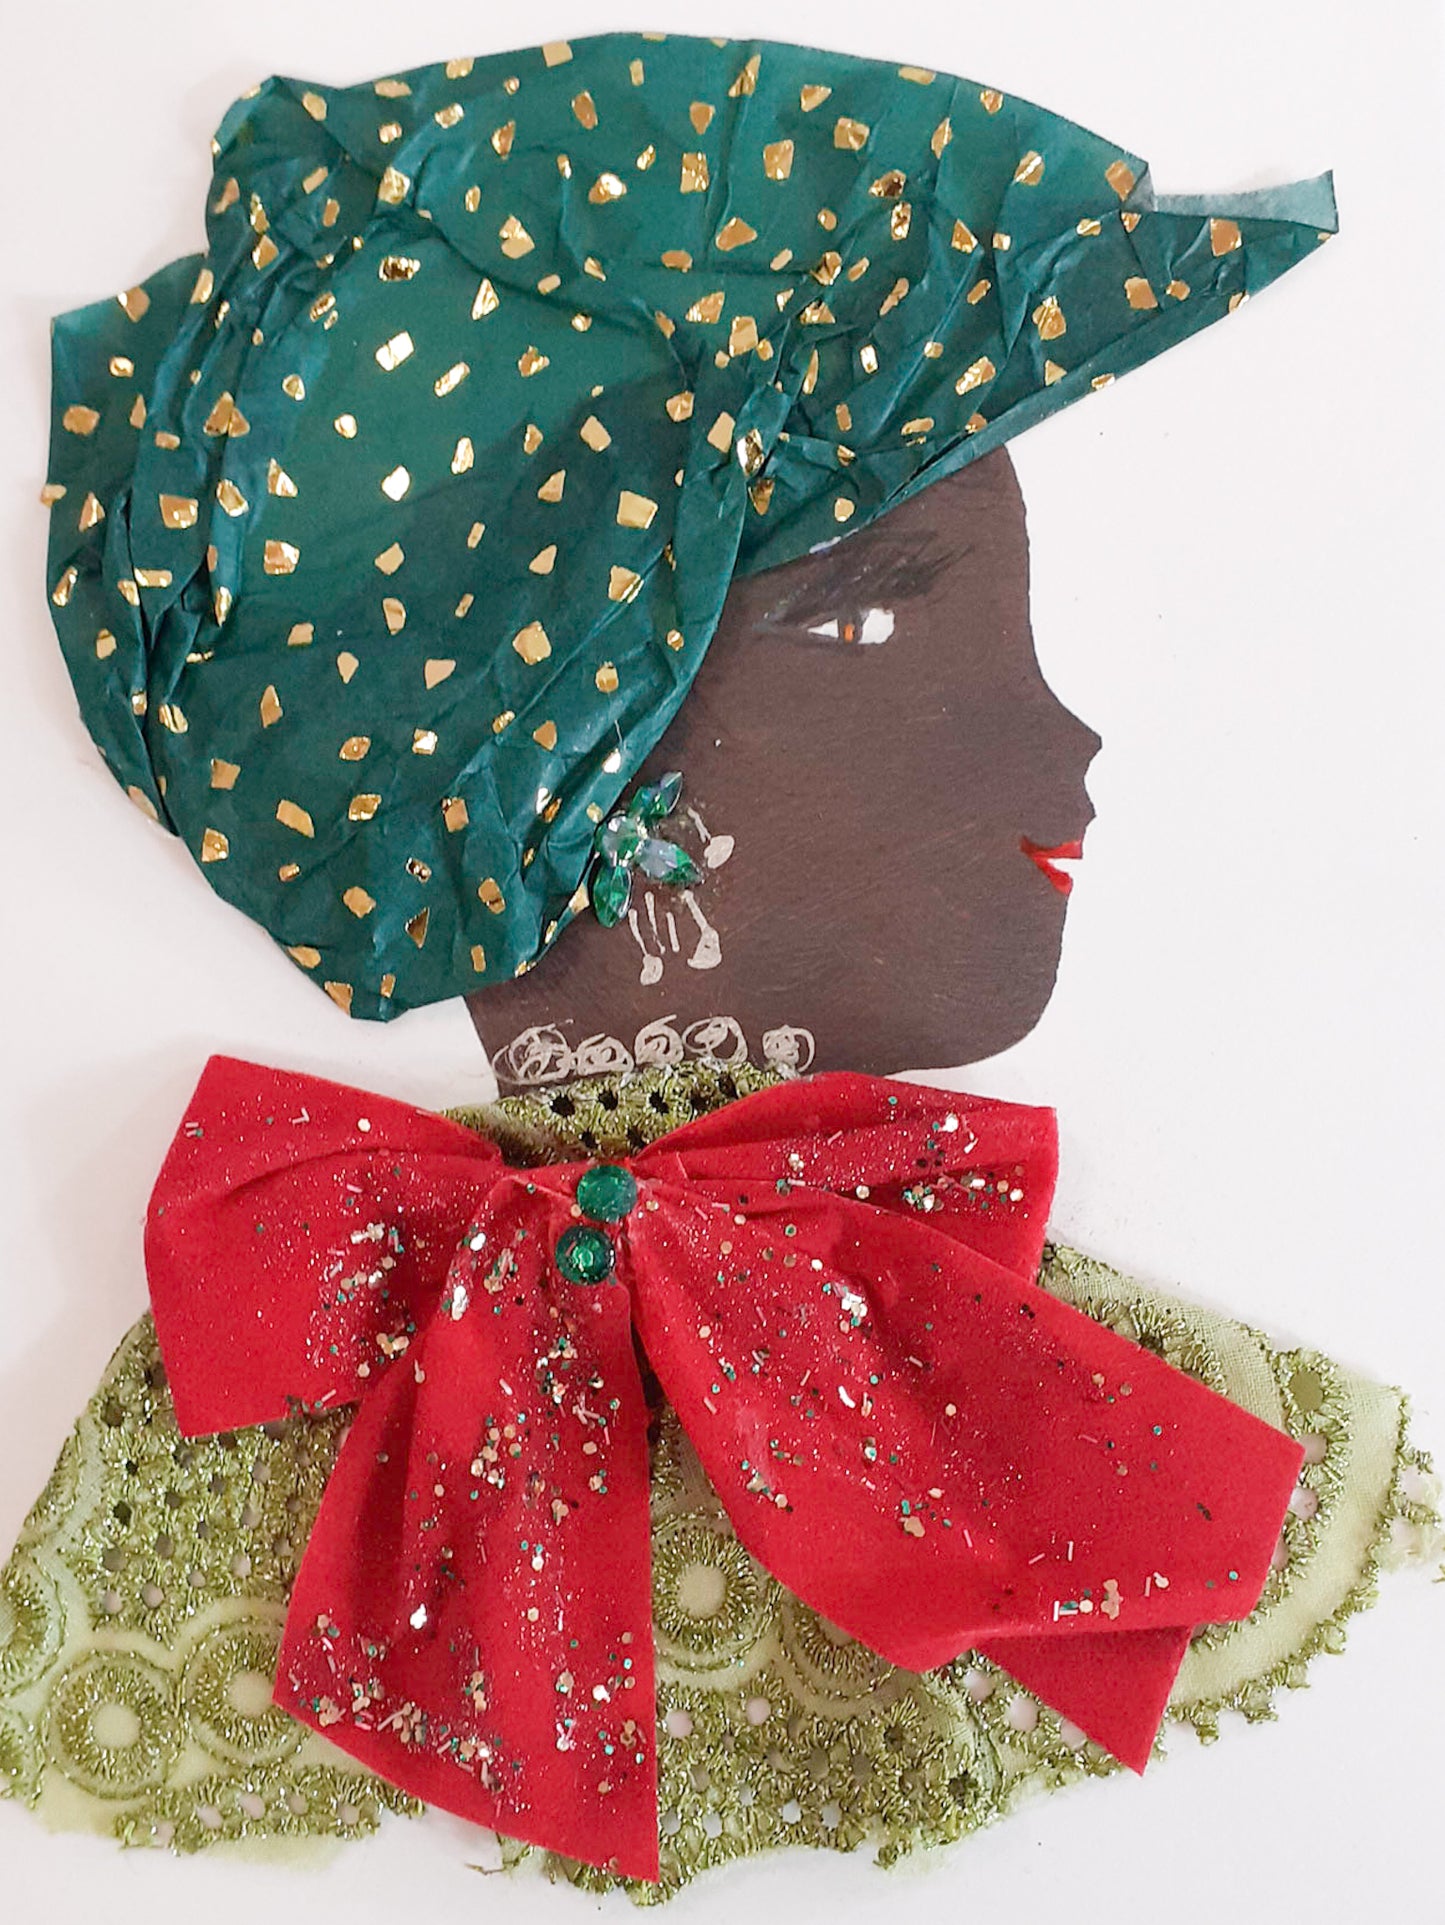 This card is named Cherry Christmas. She wears a green eyelet fabric dress with a large red bow covered in silver sparkles on top. Her headscarf is dark green and has a gold fleck pattern to it. 